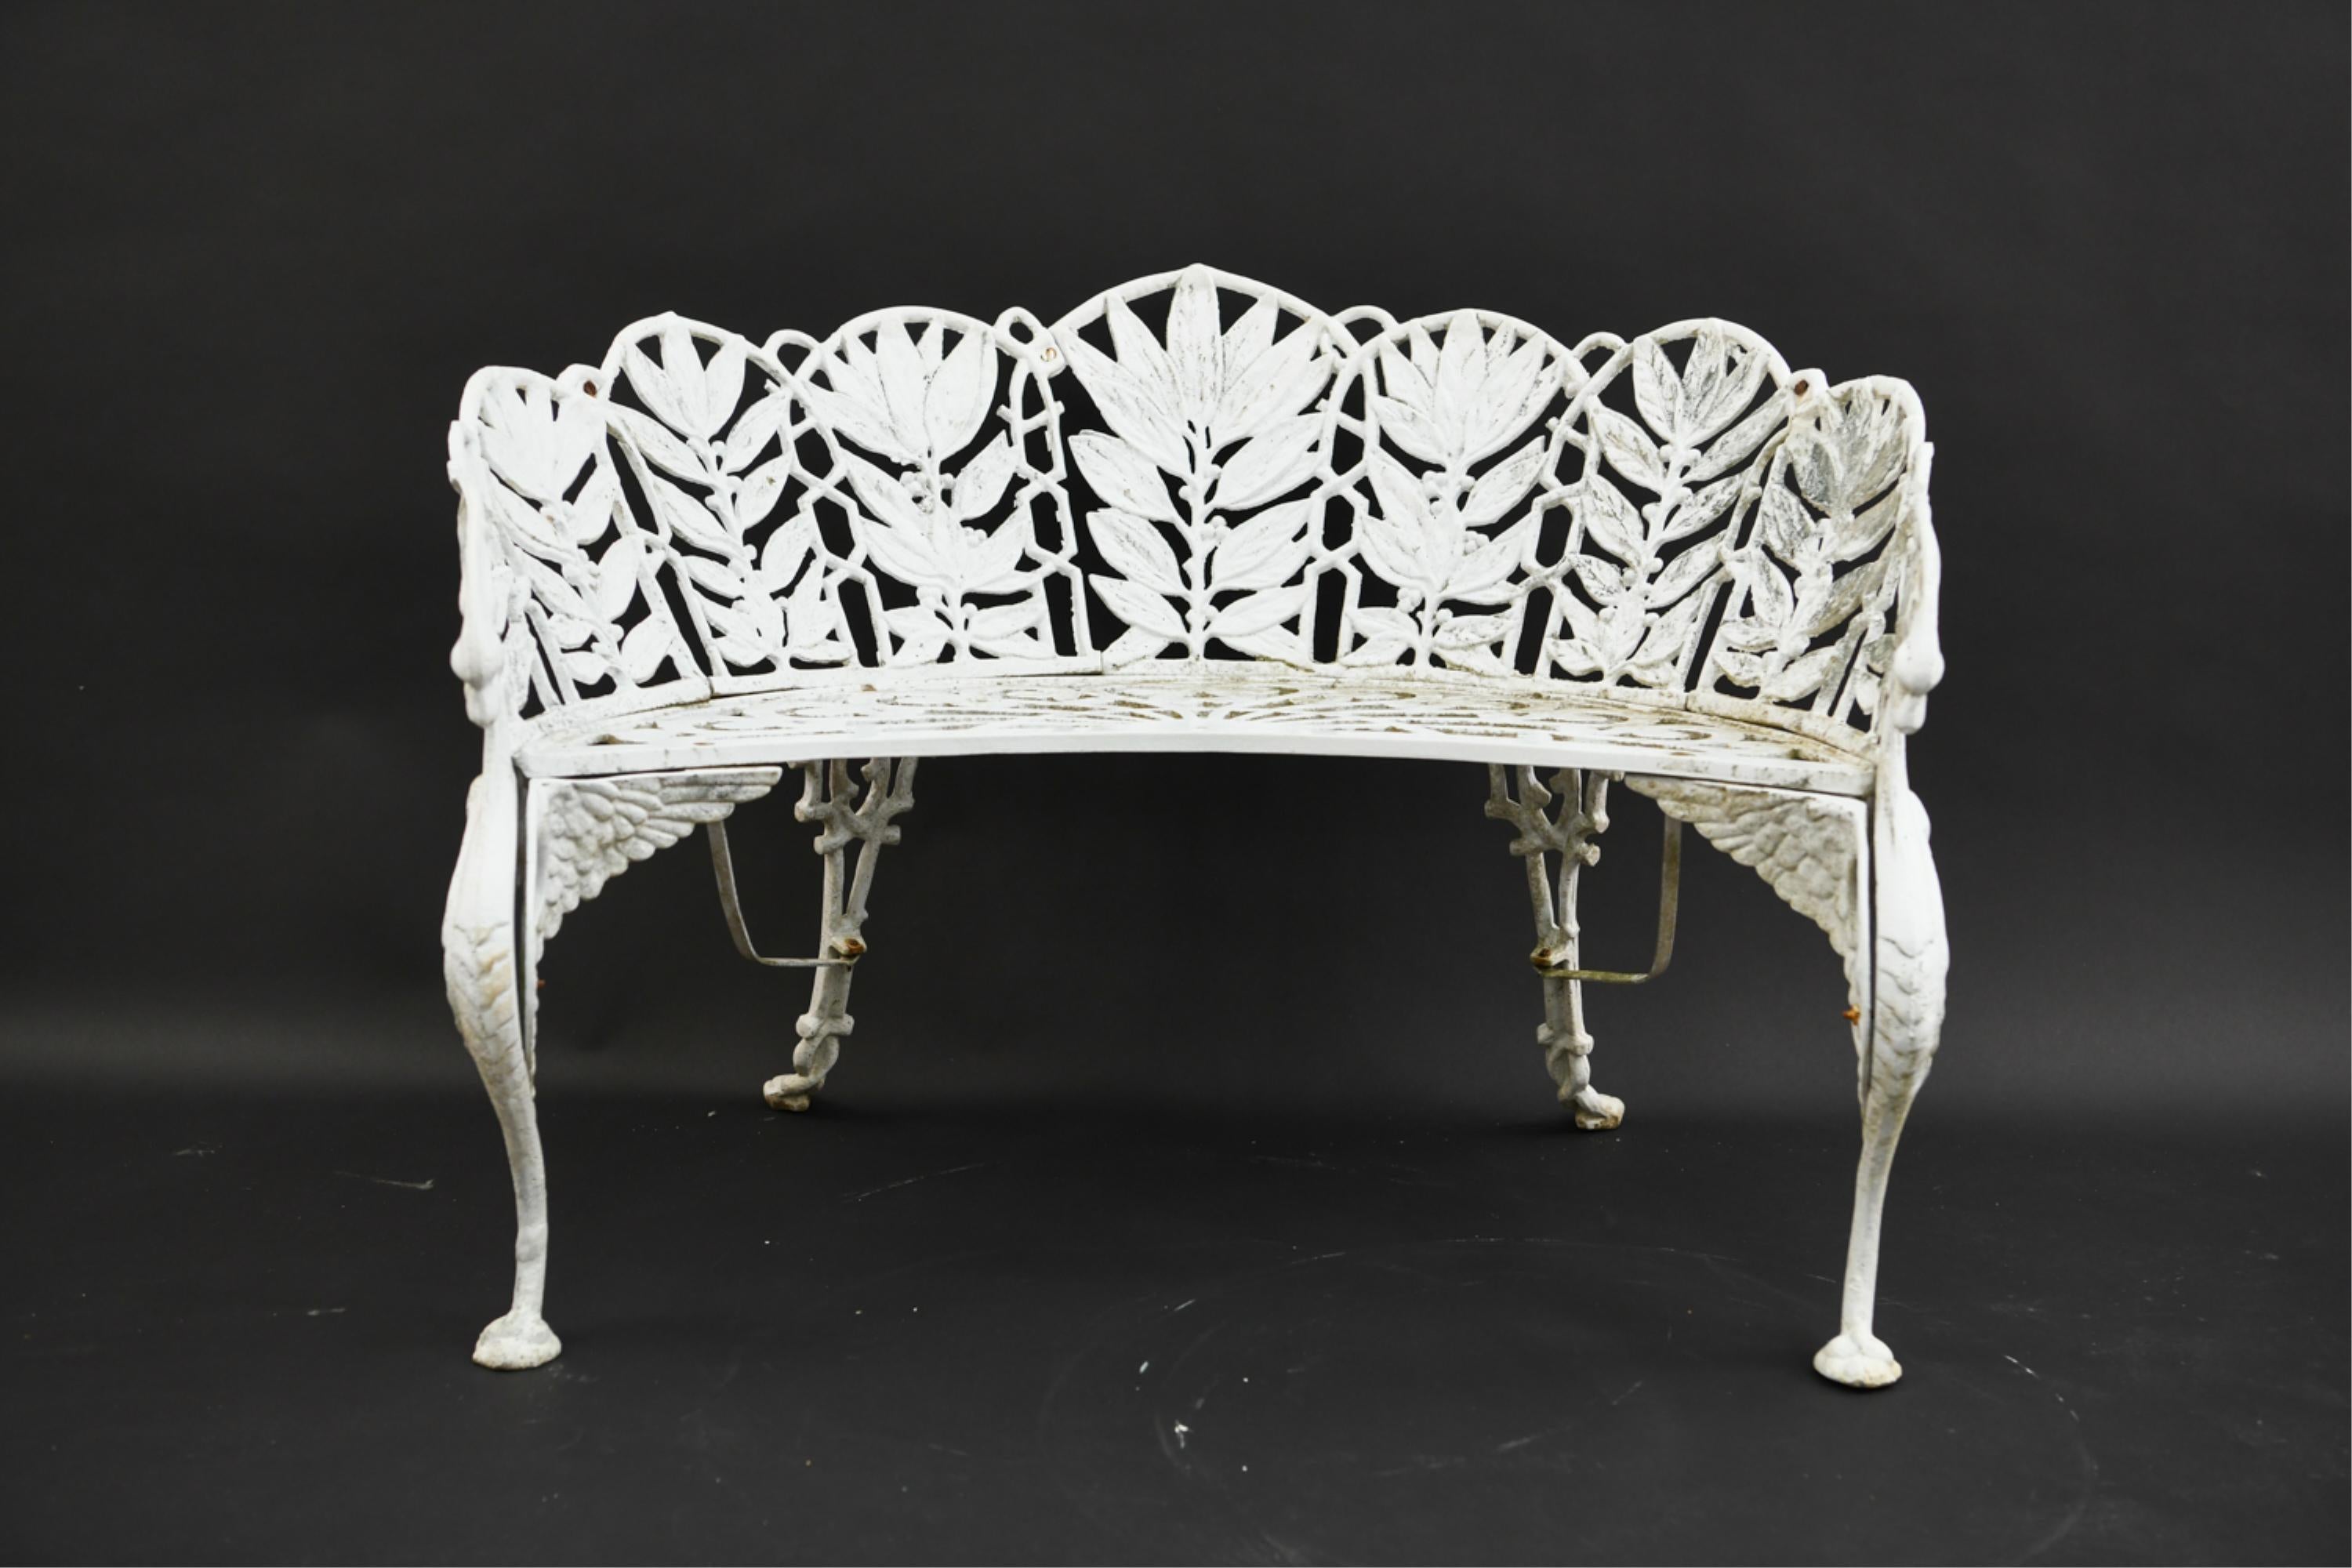 Rare set of Coalbrookdale style 3 cast aluminum laurel leaf motif design garden or patio bench and two matching armchairs with winged Griffen design leg supports painted white, after the originally produced by J. L. Mott. Perfect for summer